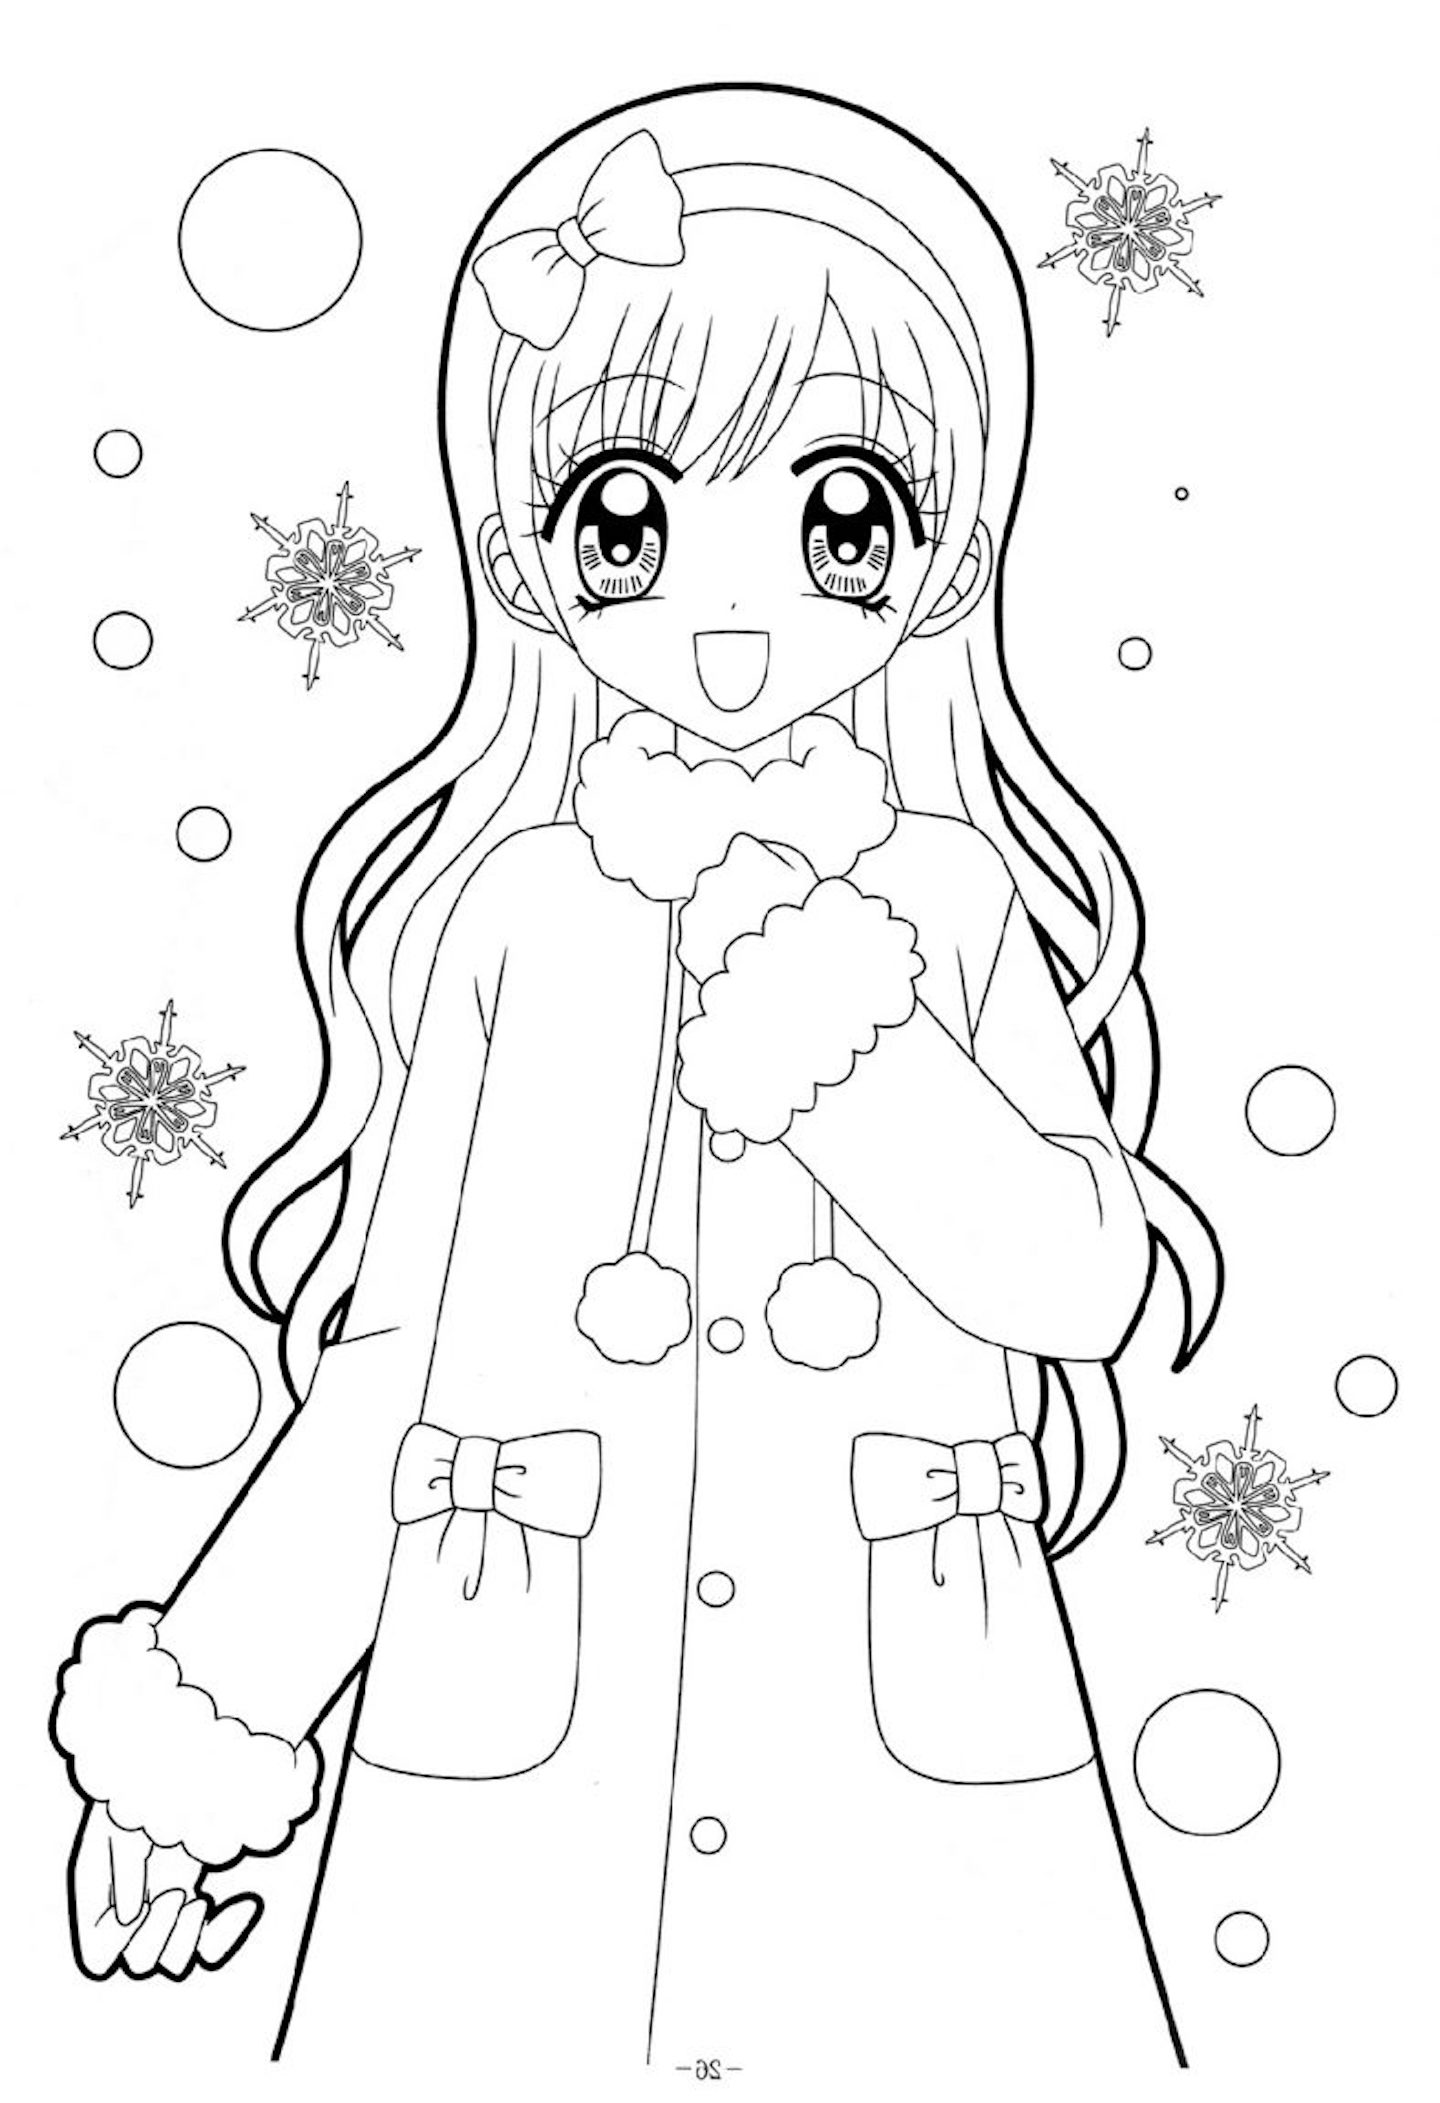 Anime Girl Coloring Pages And Other Top 10 Themed Coloring Challenges -  Coloring Home